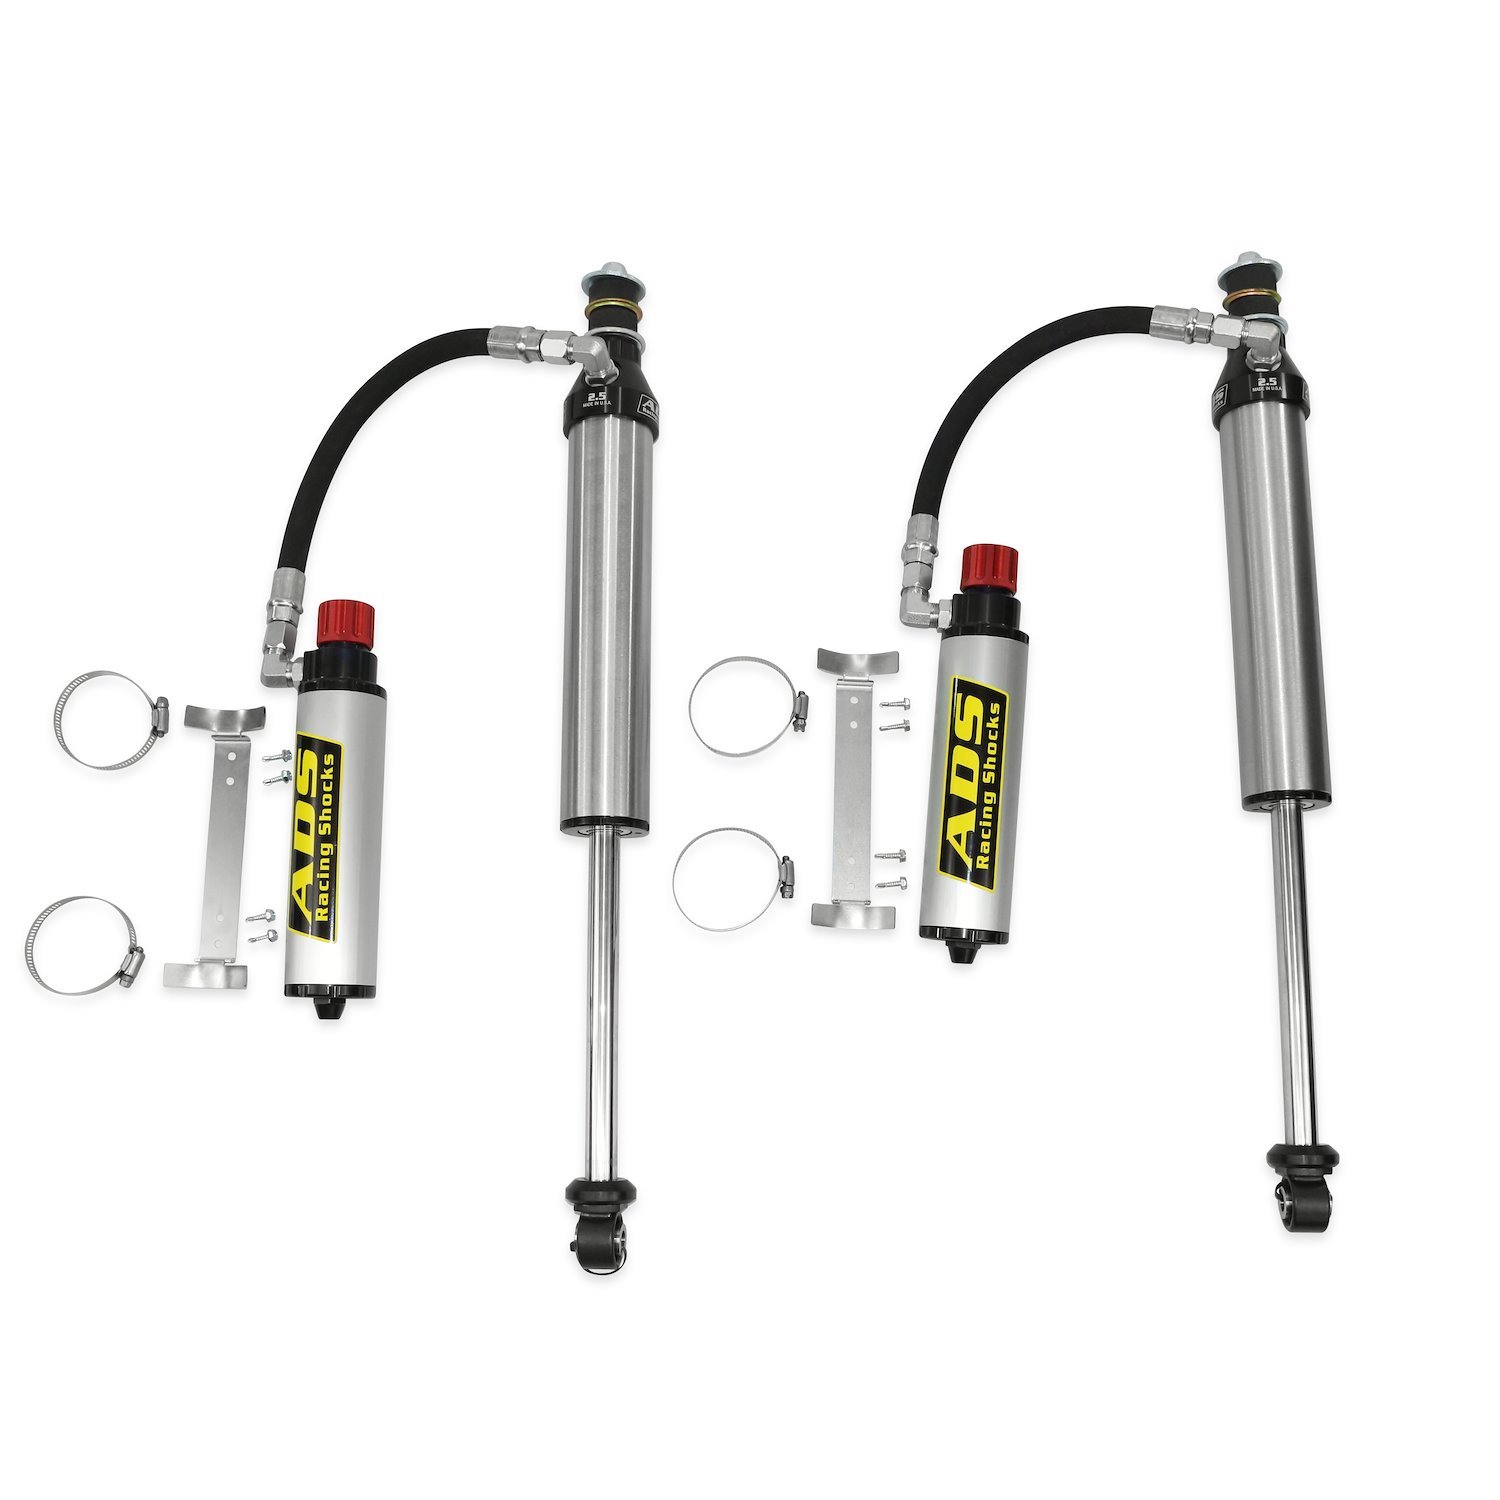 250-ZR2ER-A00 Racing Bolt-On Shocks, Fits Select Chevy Colorado/GMC Canyon ZR2, 2.5 in., w/ Piggy Back Clicker Reservoir